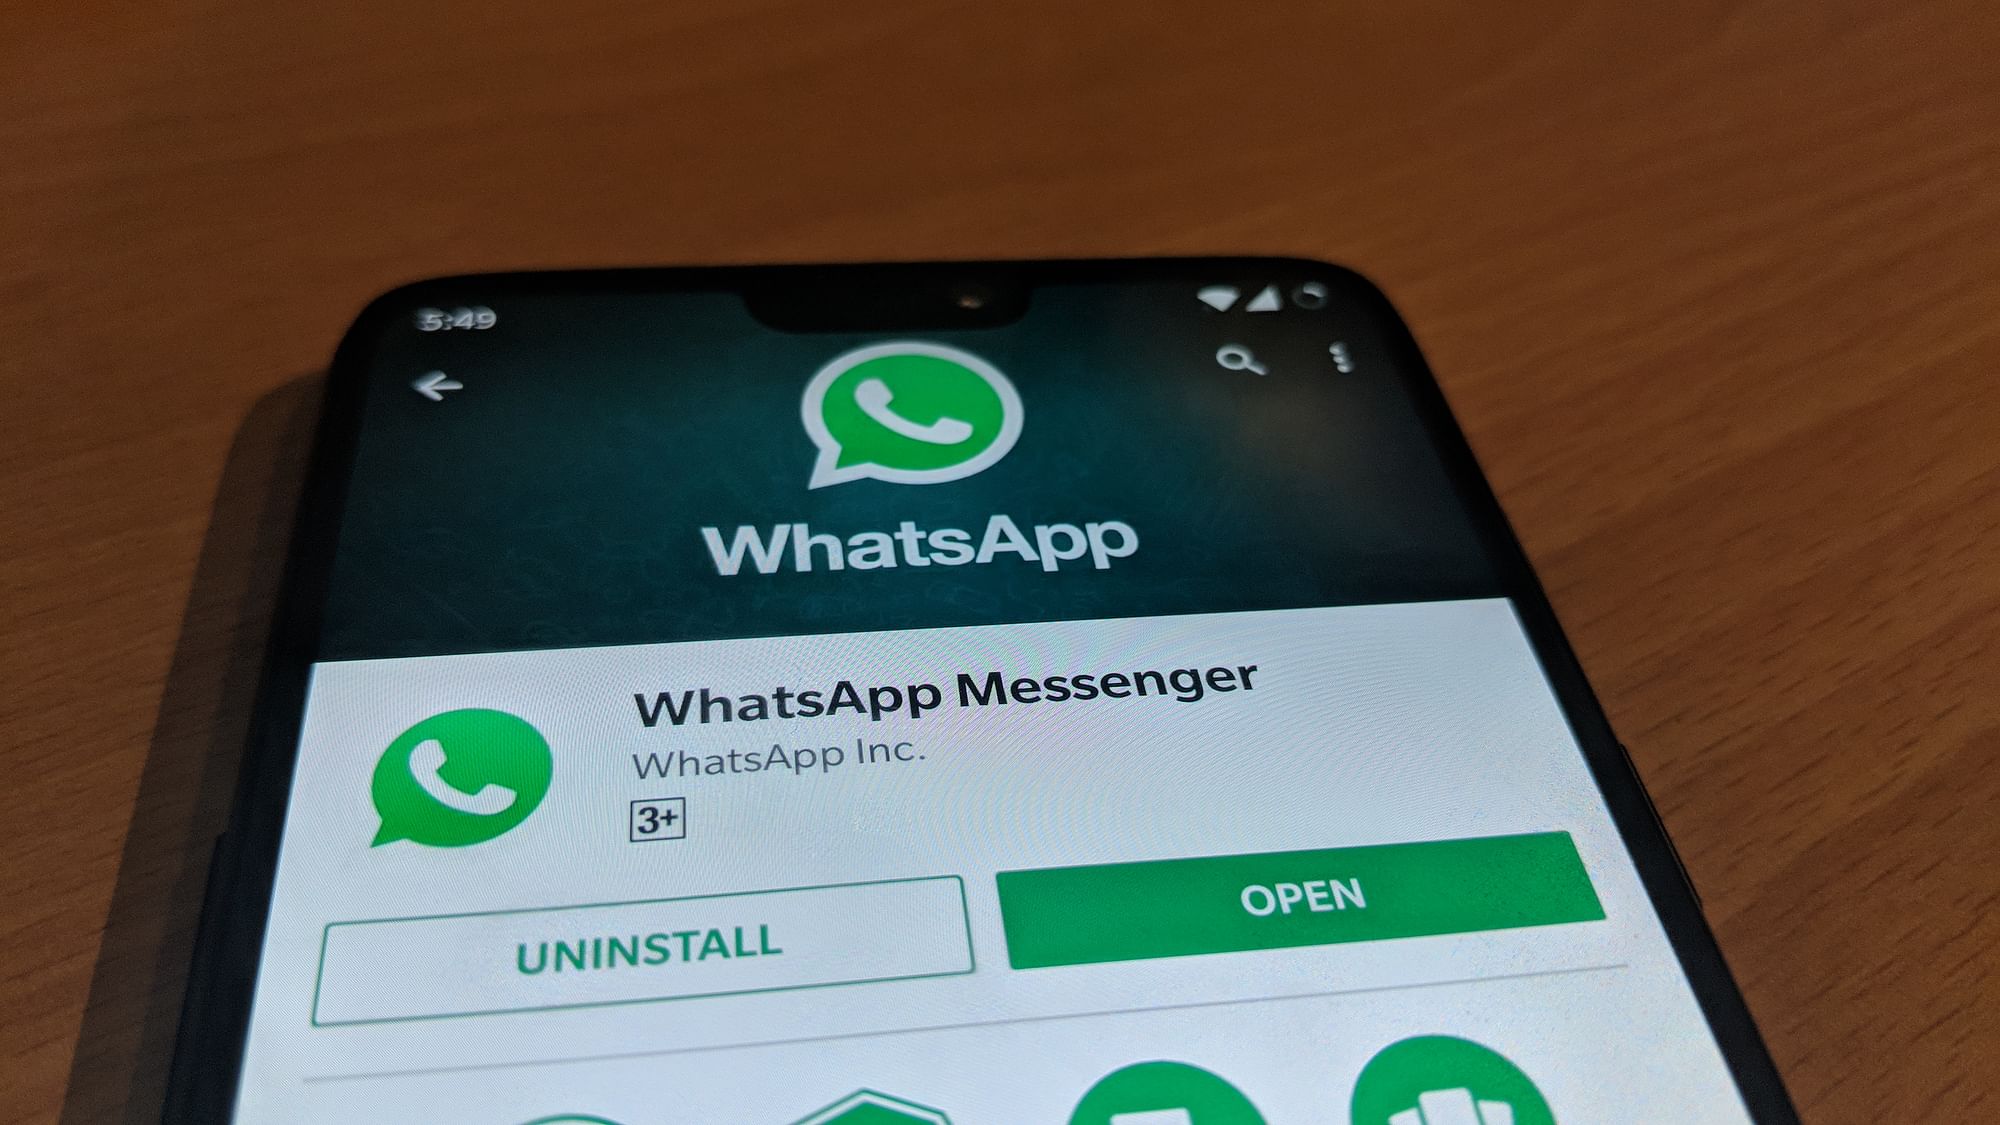 WhatsApp is working on this feature which should be available soon.